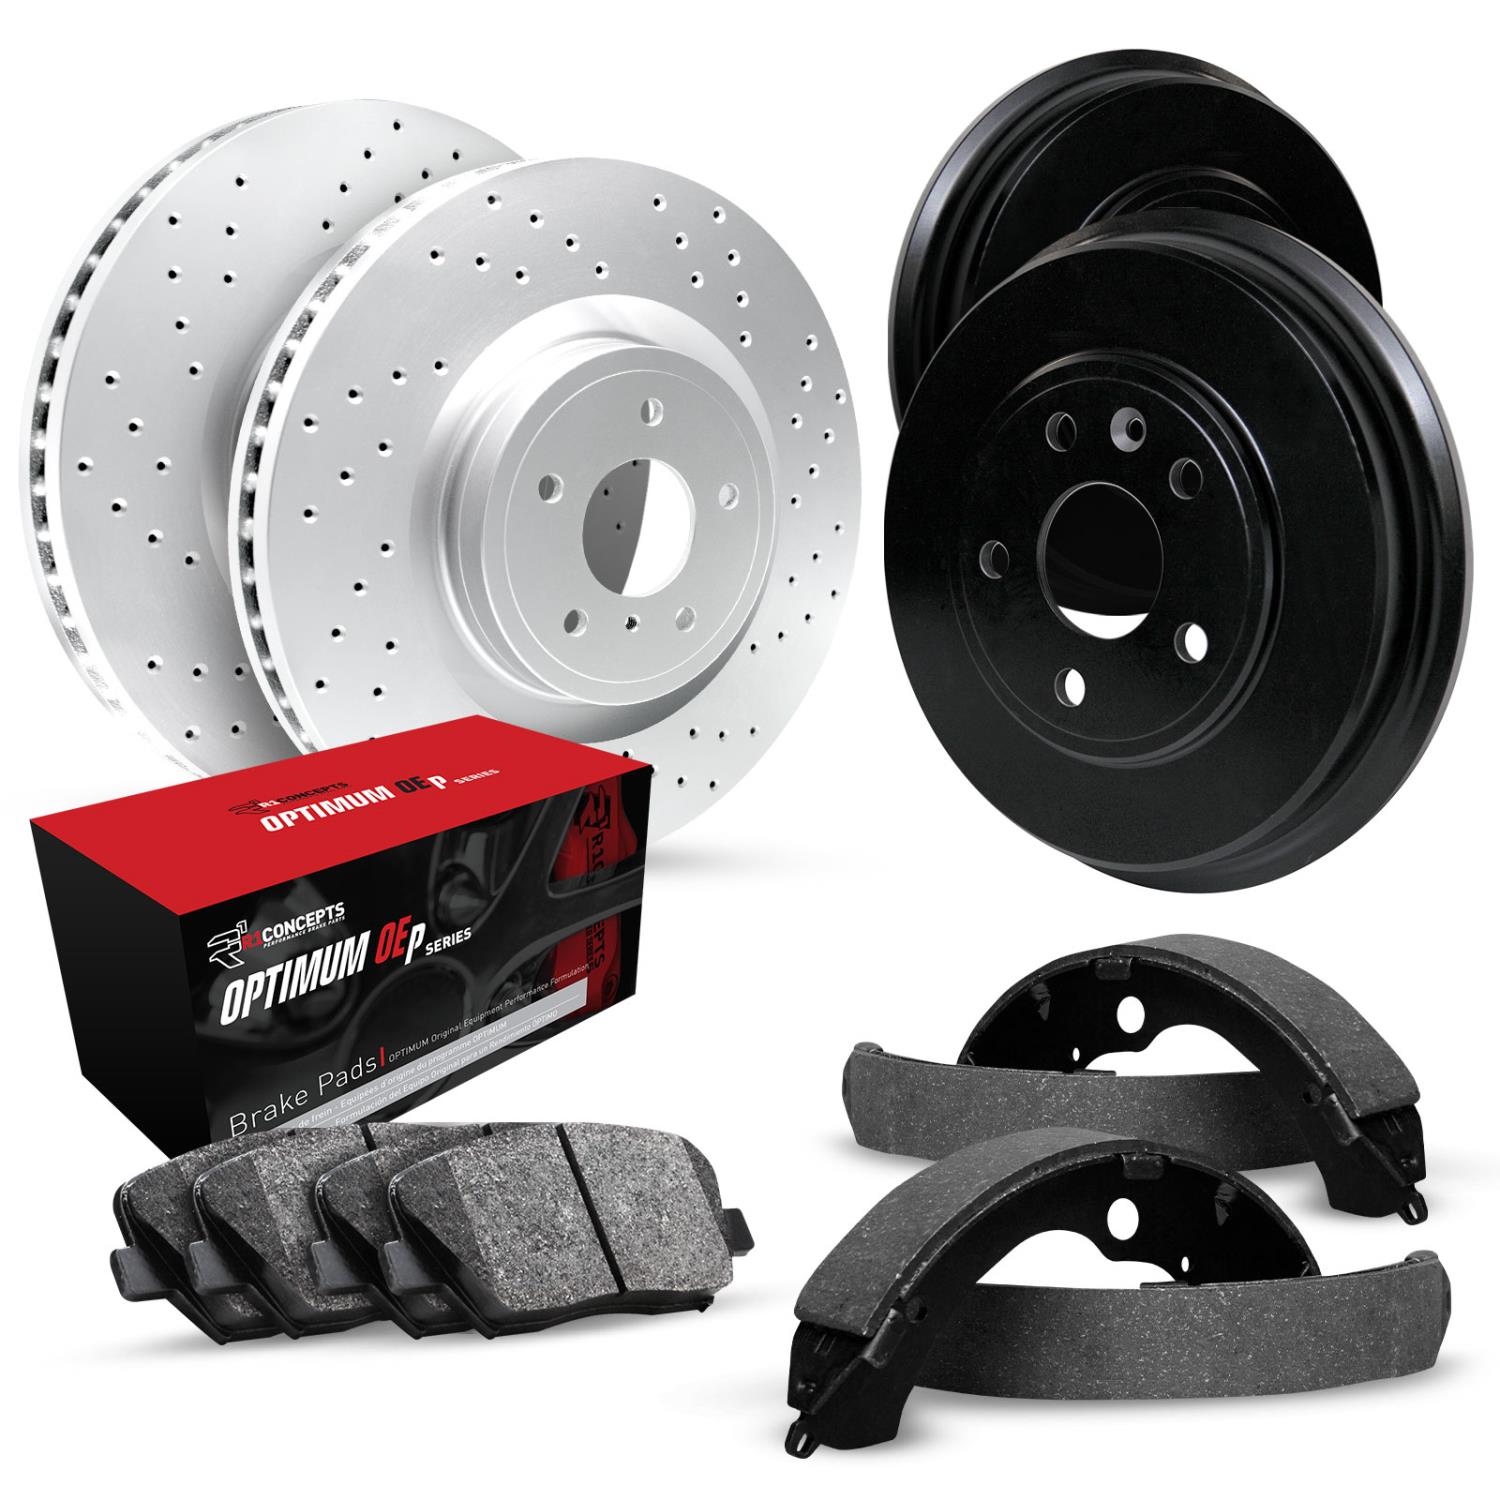 GEO-Carbon Drilled Brake Rotor & Drum Set w/Optimum OE Pads & Shoes, 2000-2003 GM, Position: Front & Rear